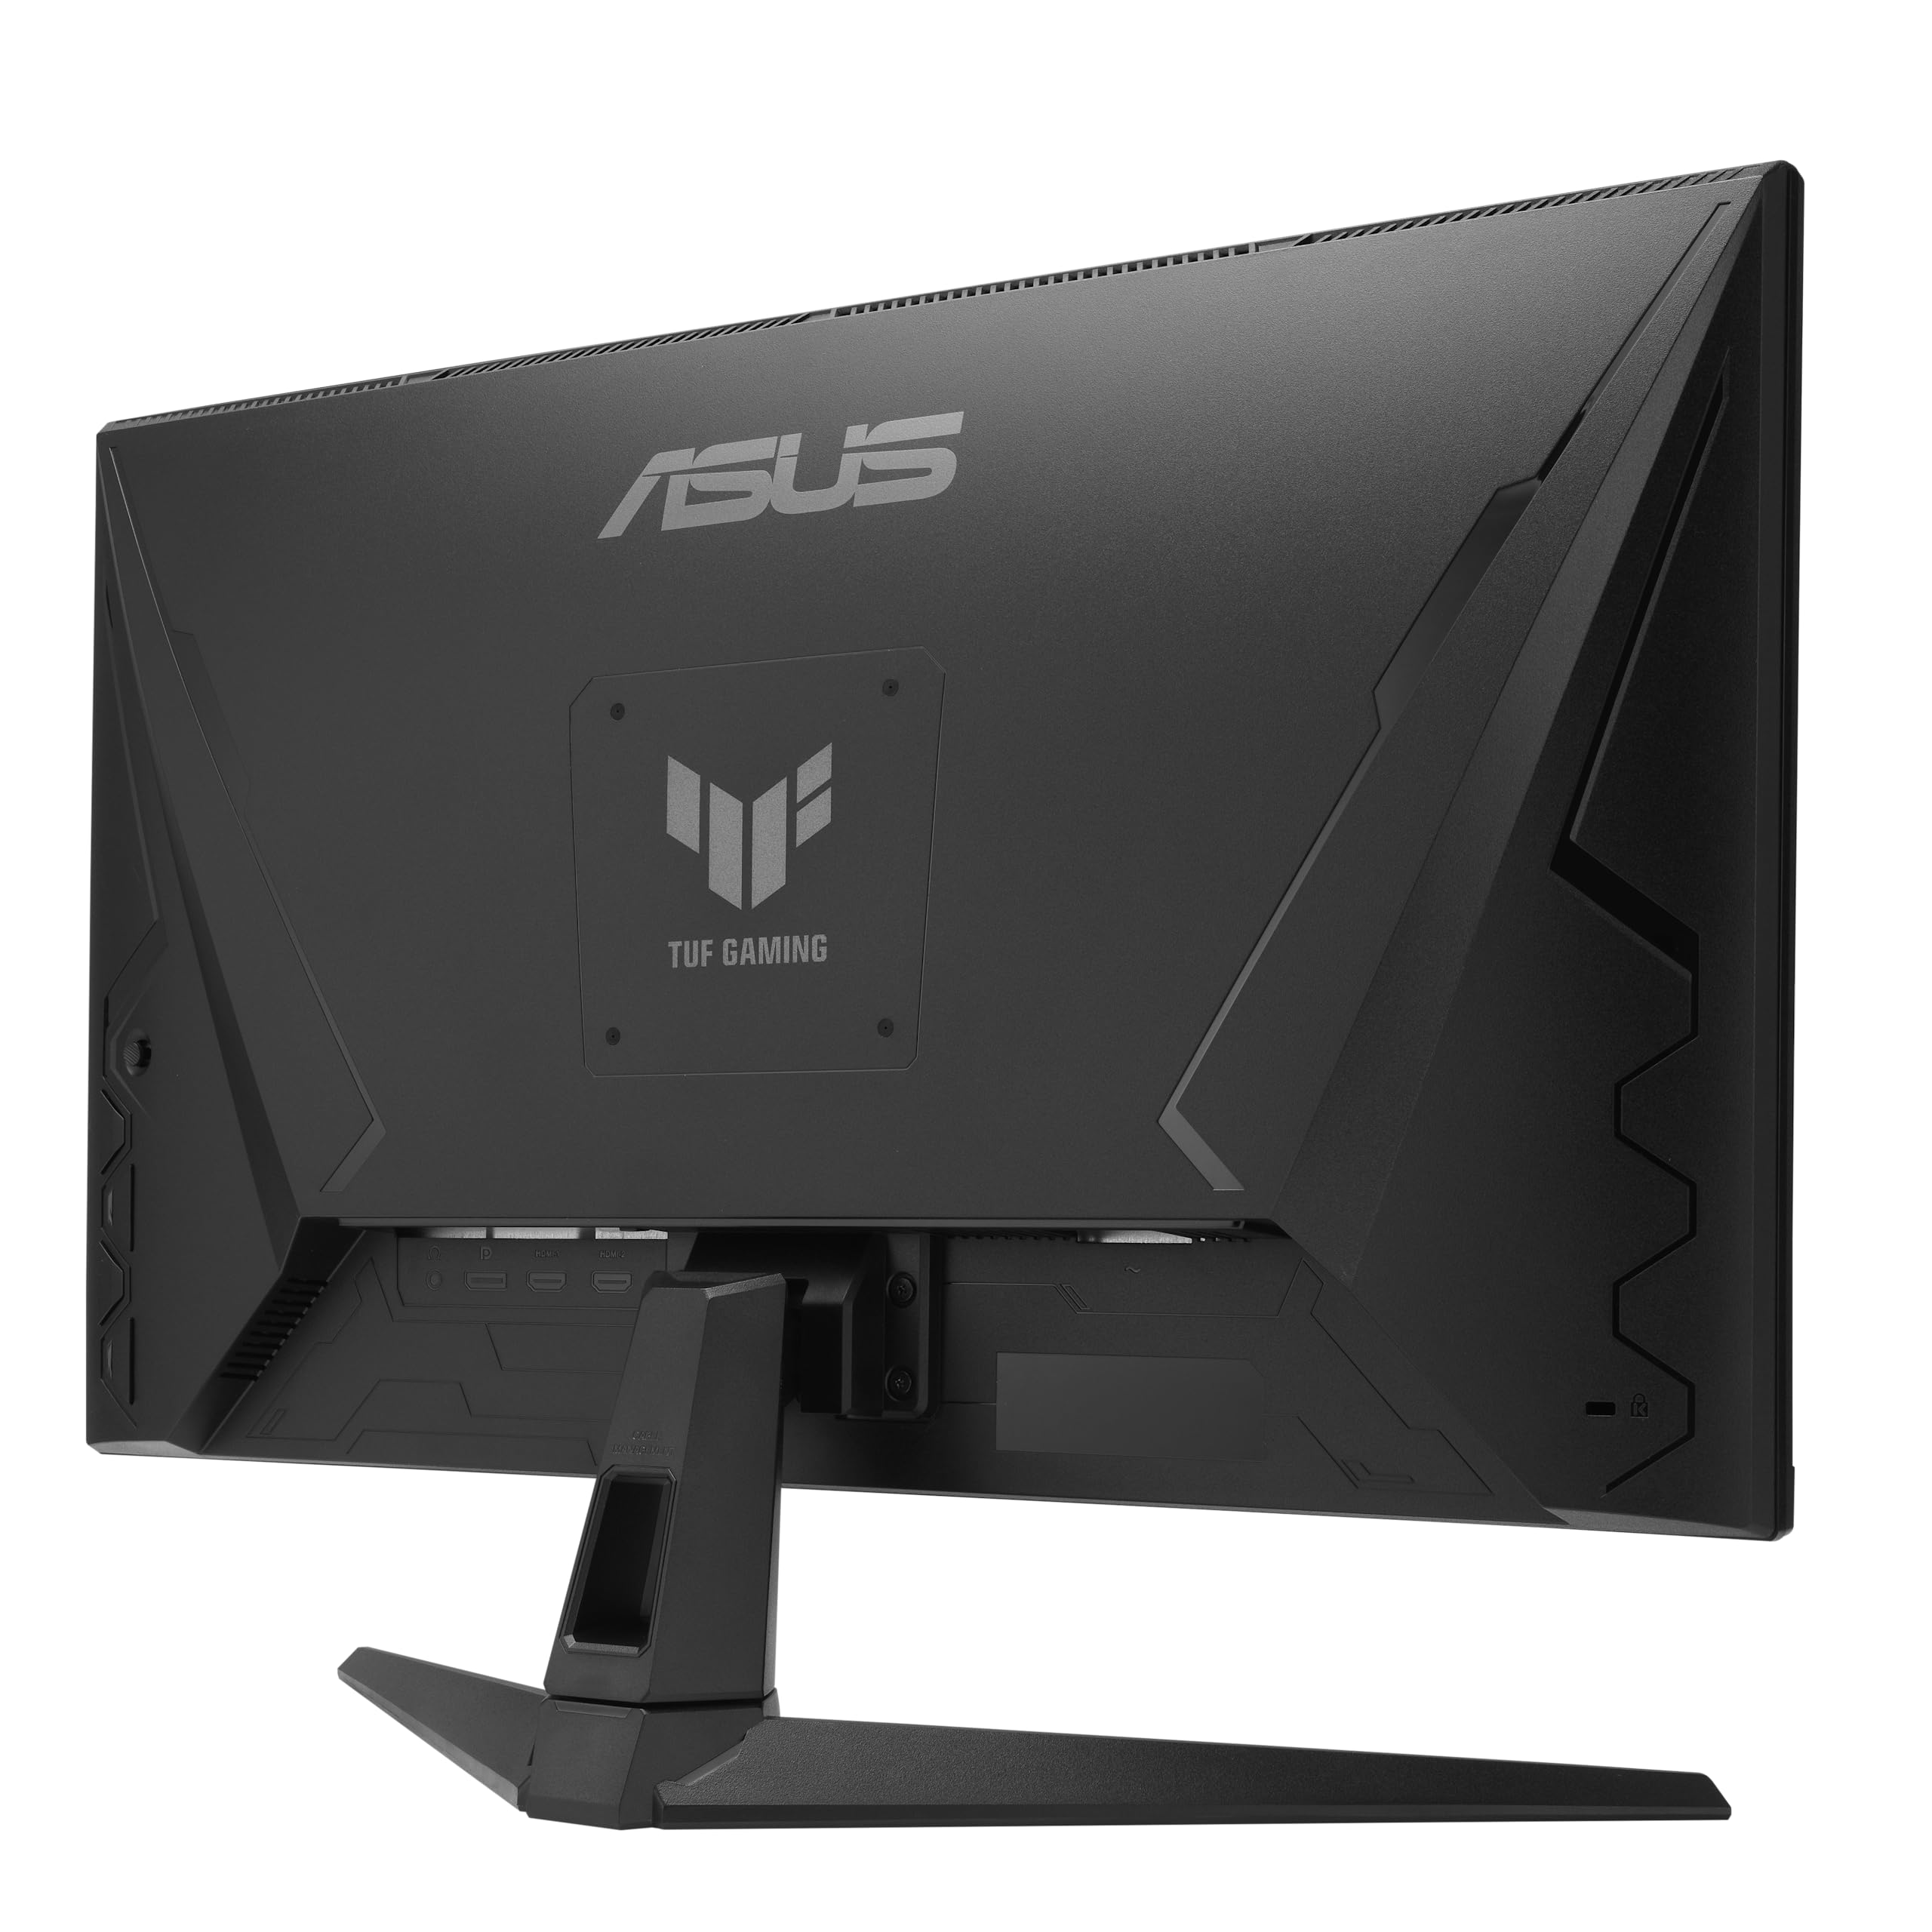 ASUS TUF Gaming 27” 1080P HDR Monitor (VG279QM1A) - Full HD (1920 x 1080), 280Hz, 1ms, Fast IPS, Extreme Low Motion Blur Sync, Freesync Premium, G-SYNC Compatible, Speakers, Variable Overdrive,Black